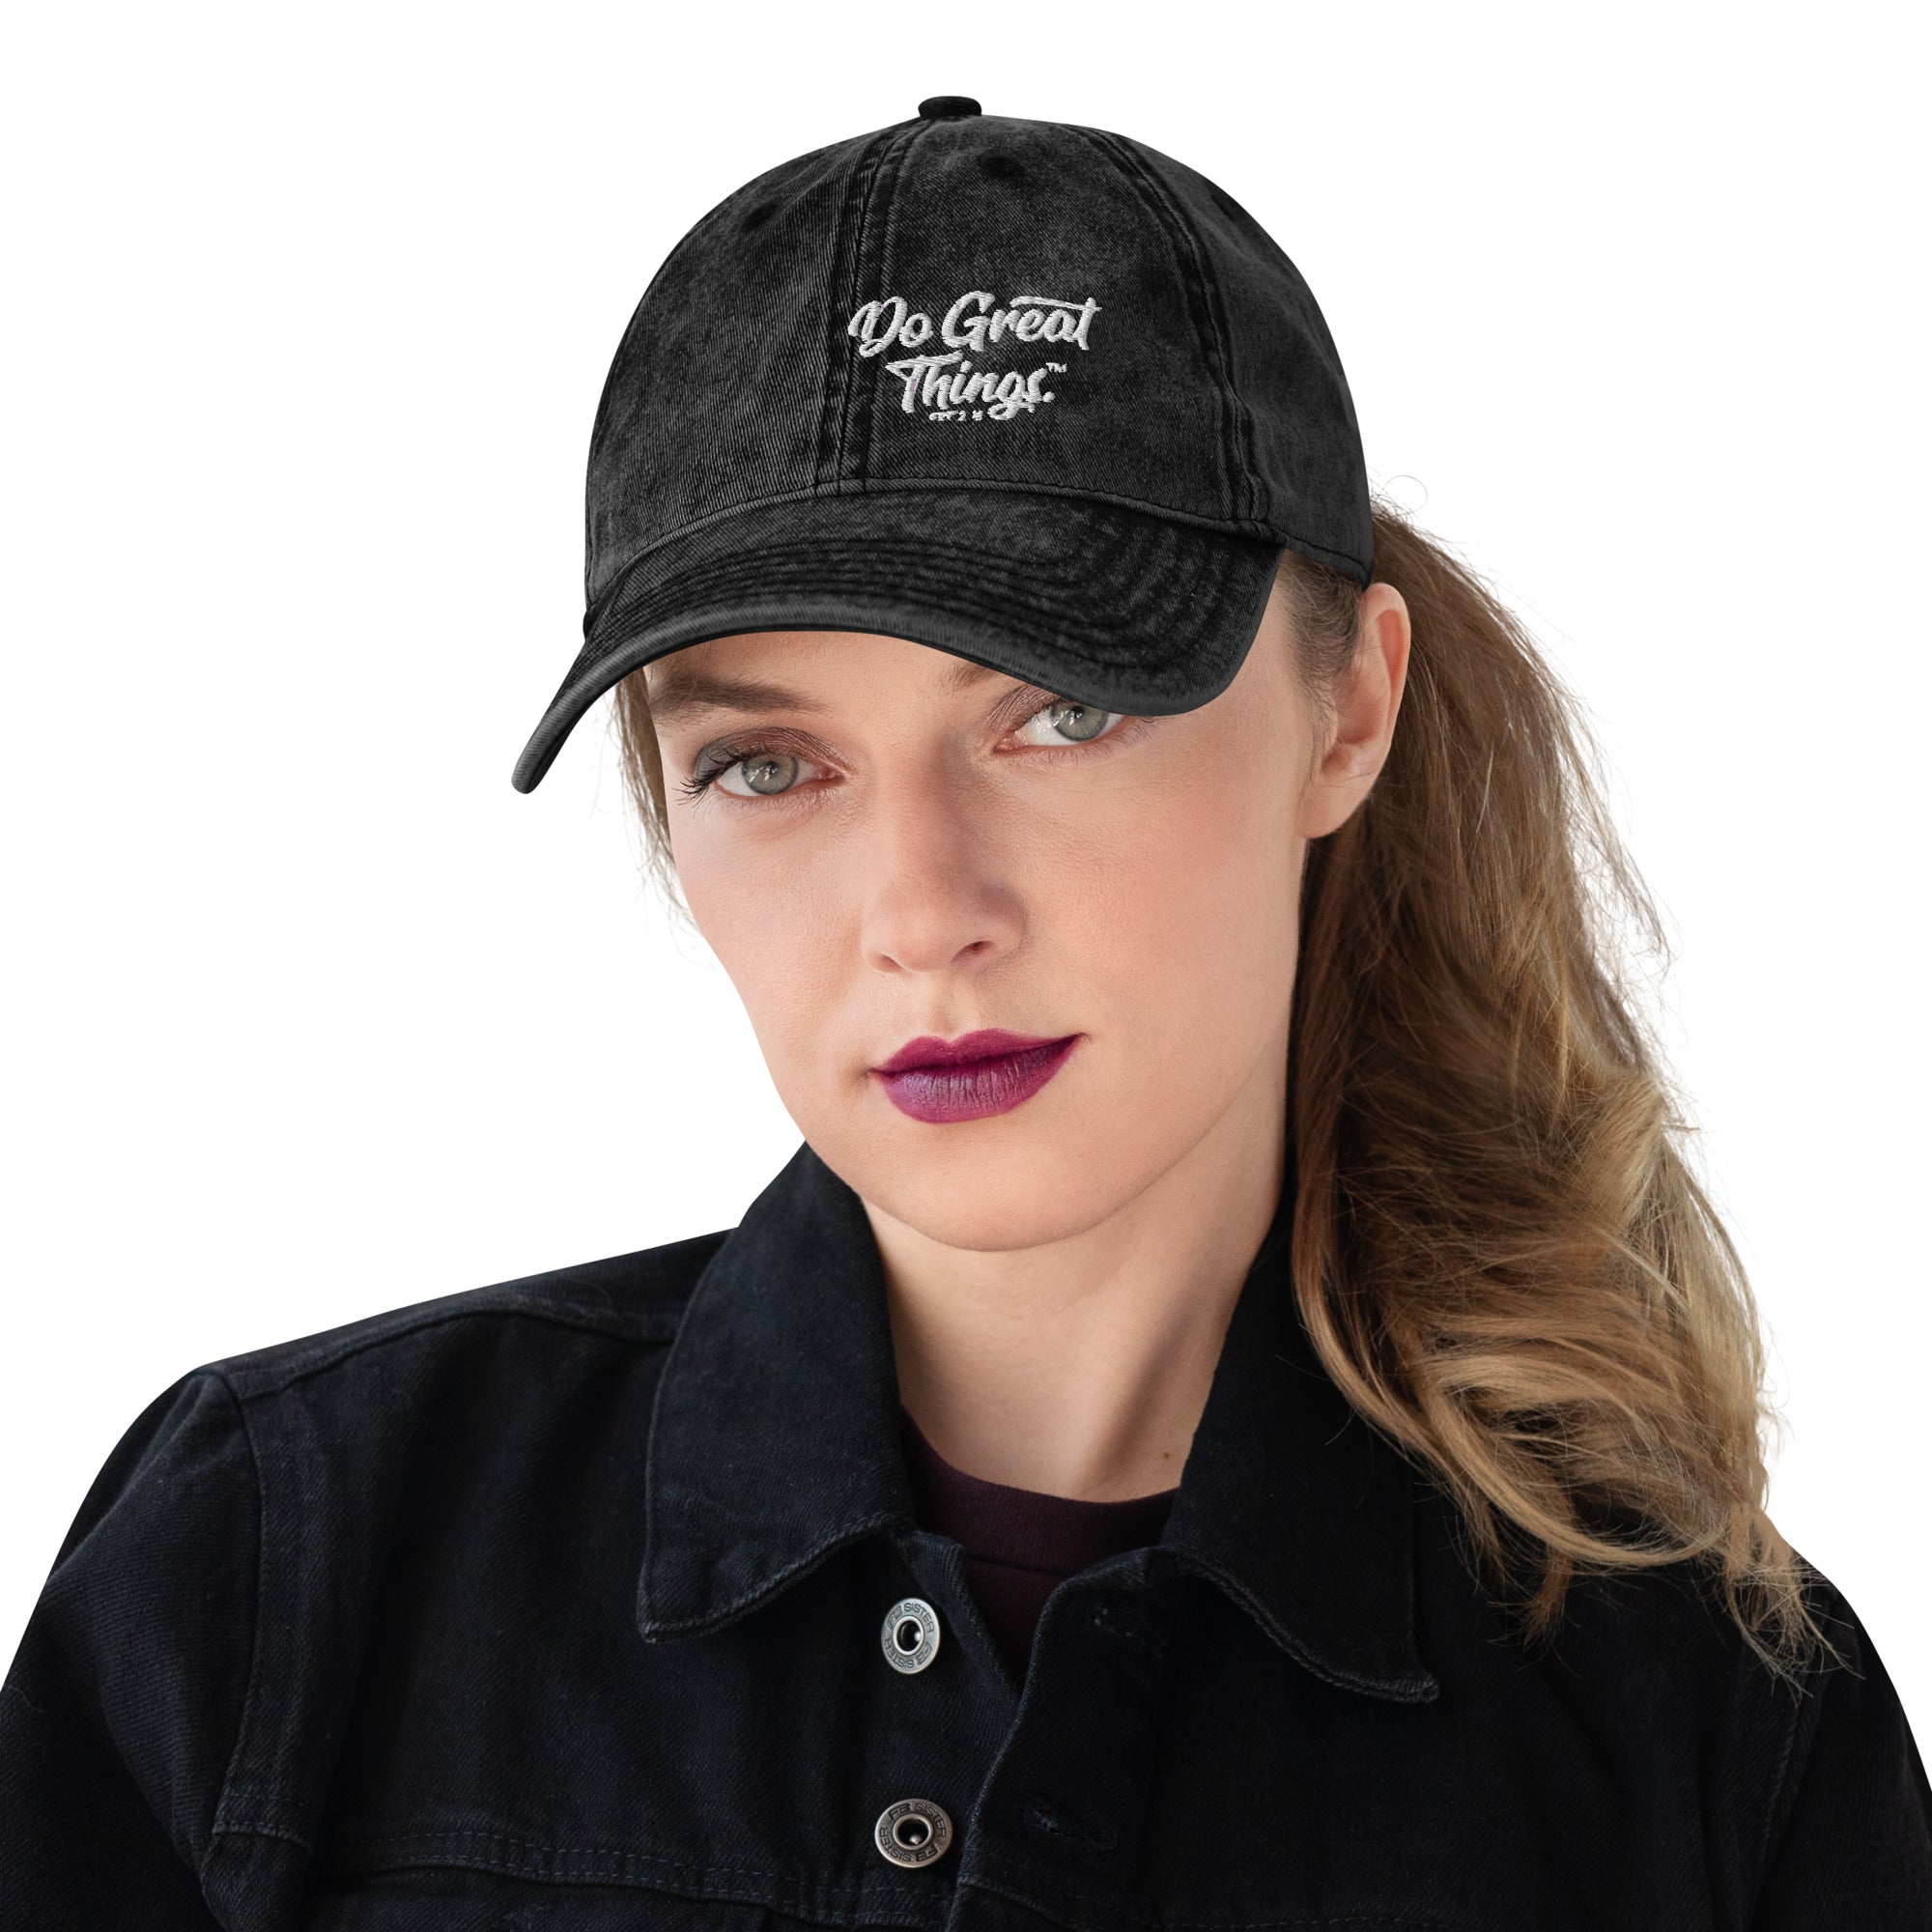 Do Great Things® Vintage Cotton Twill Cap